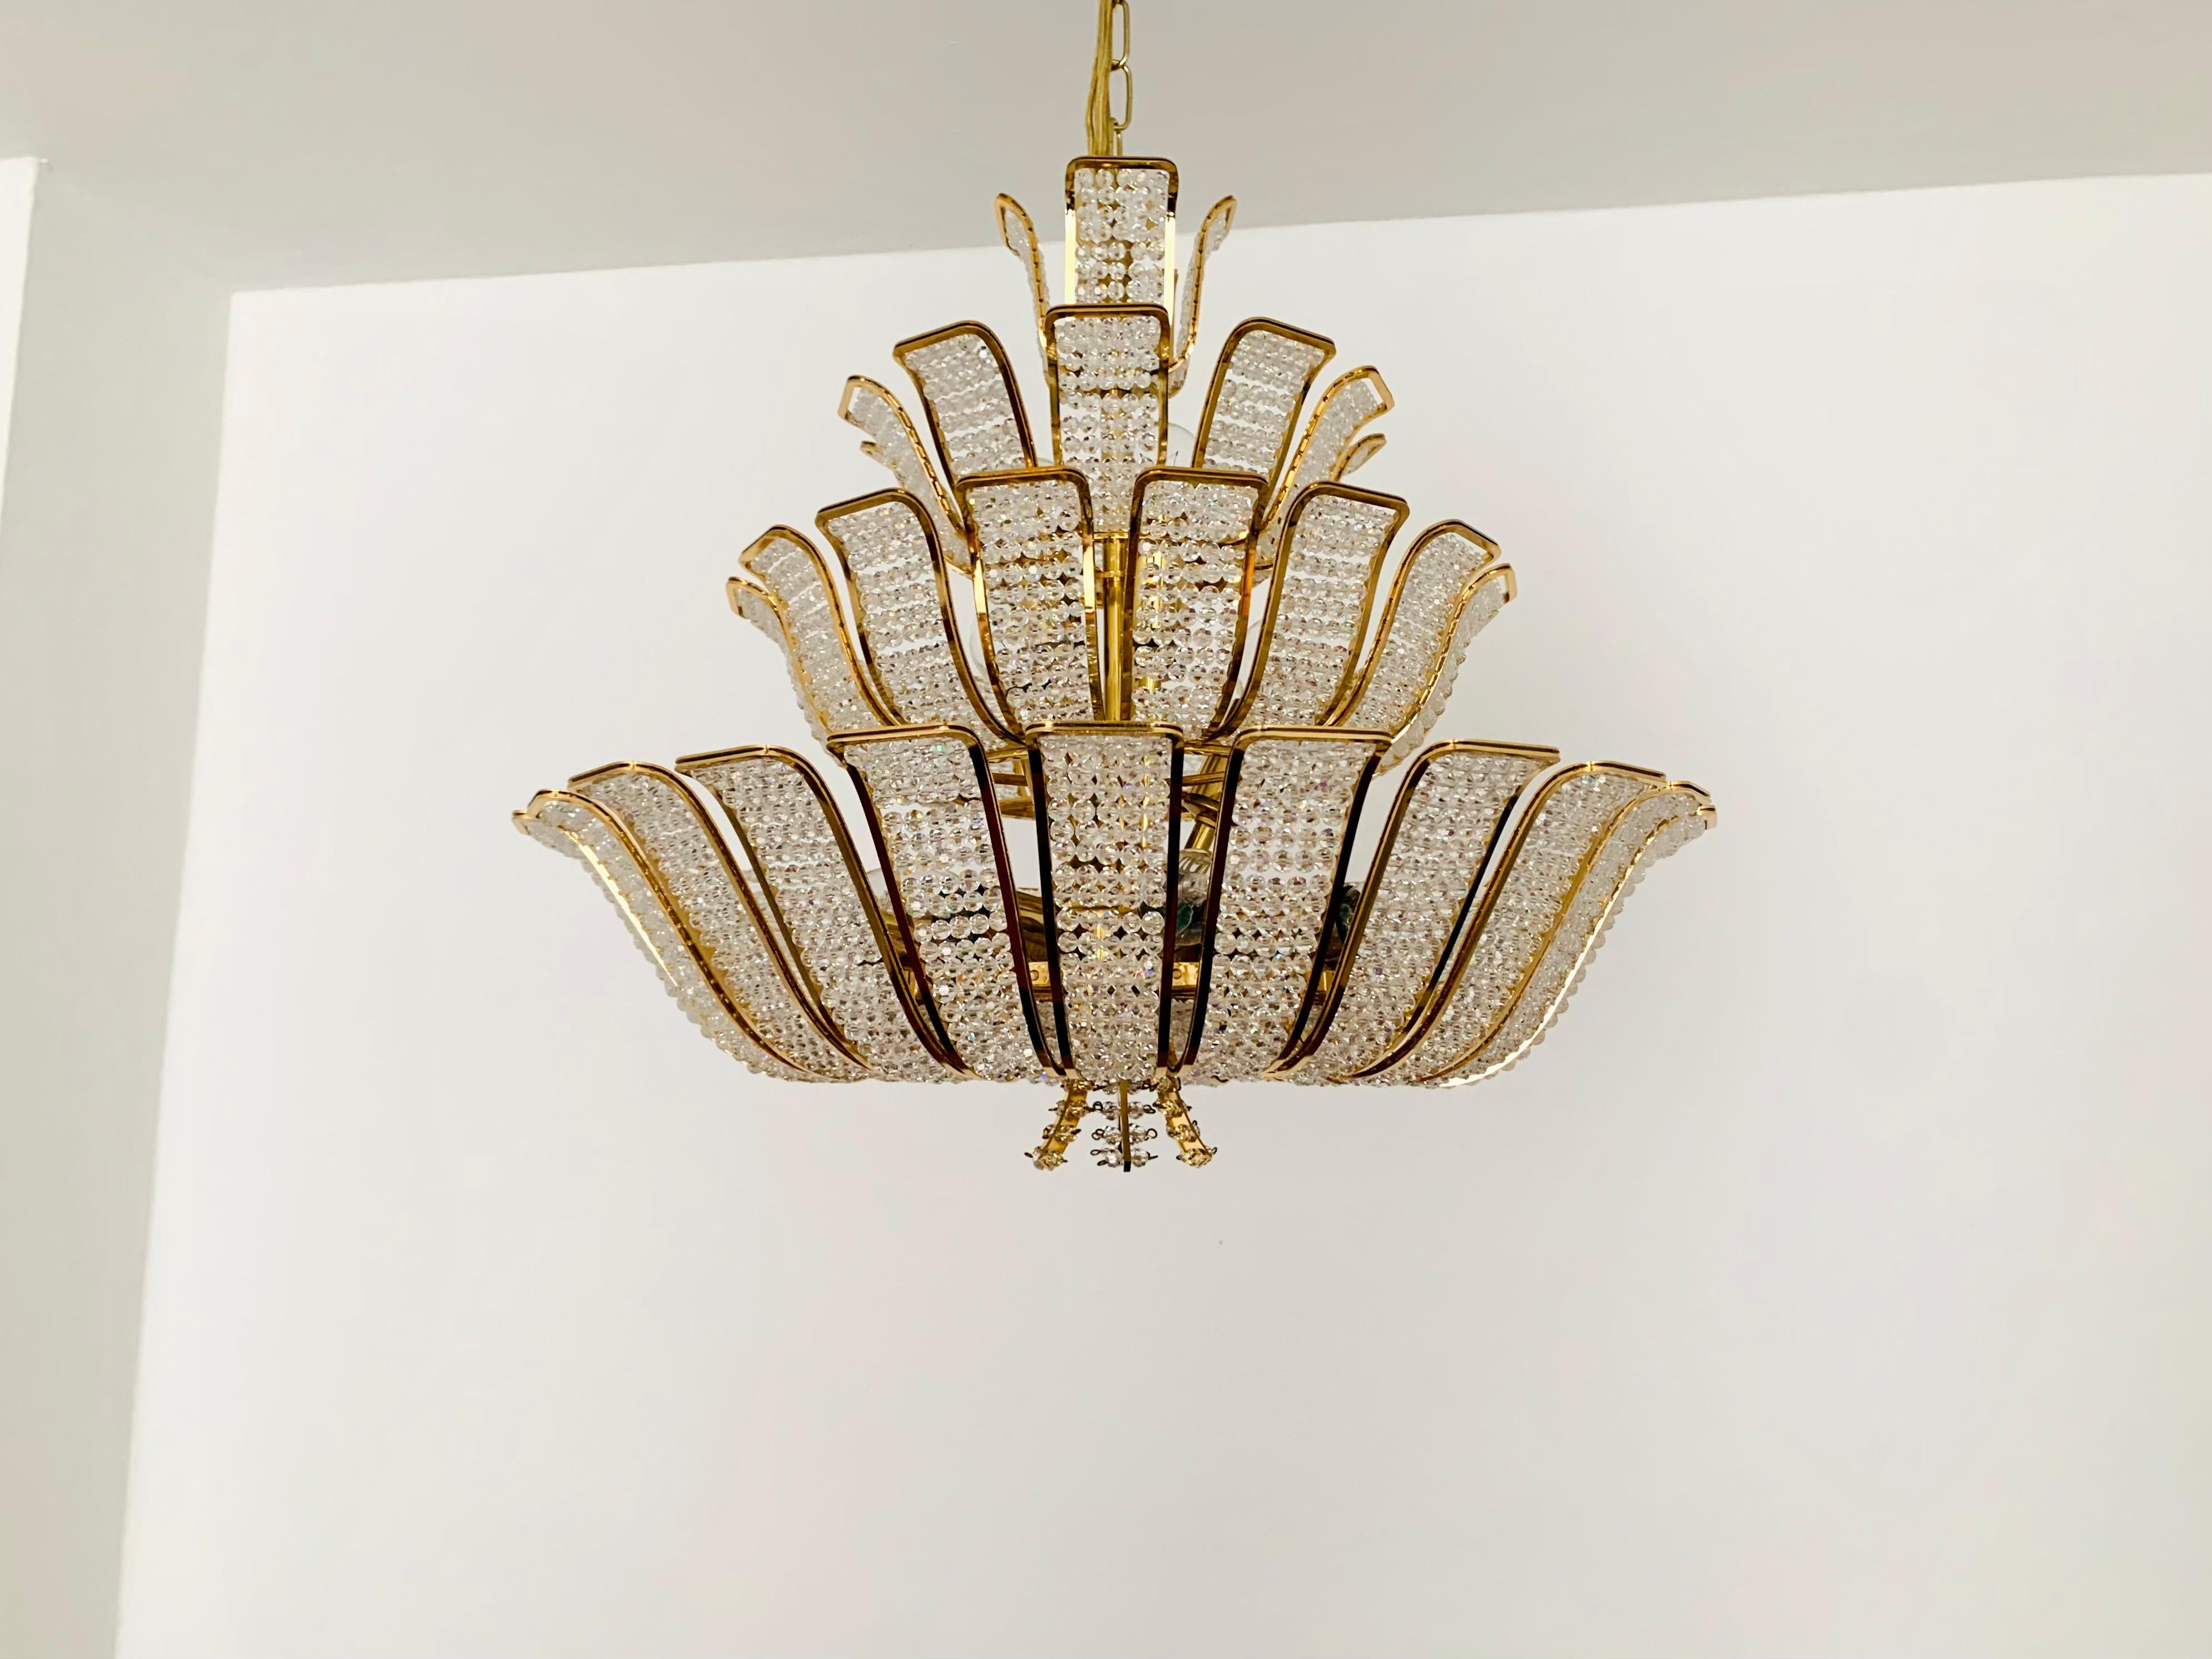 Stunningly beautiful chandelier from the 1970s.
The excellent workmanship and the very noble material impress at first glance.
Exceptionally beautiful design.
The lamp spreads a spectacular play of light in the room.

Manufacturer: